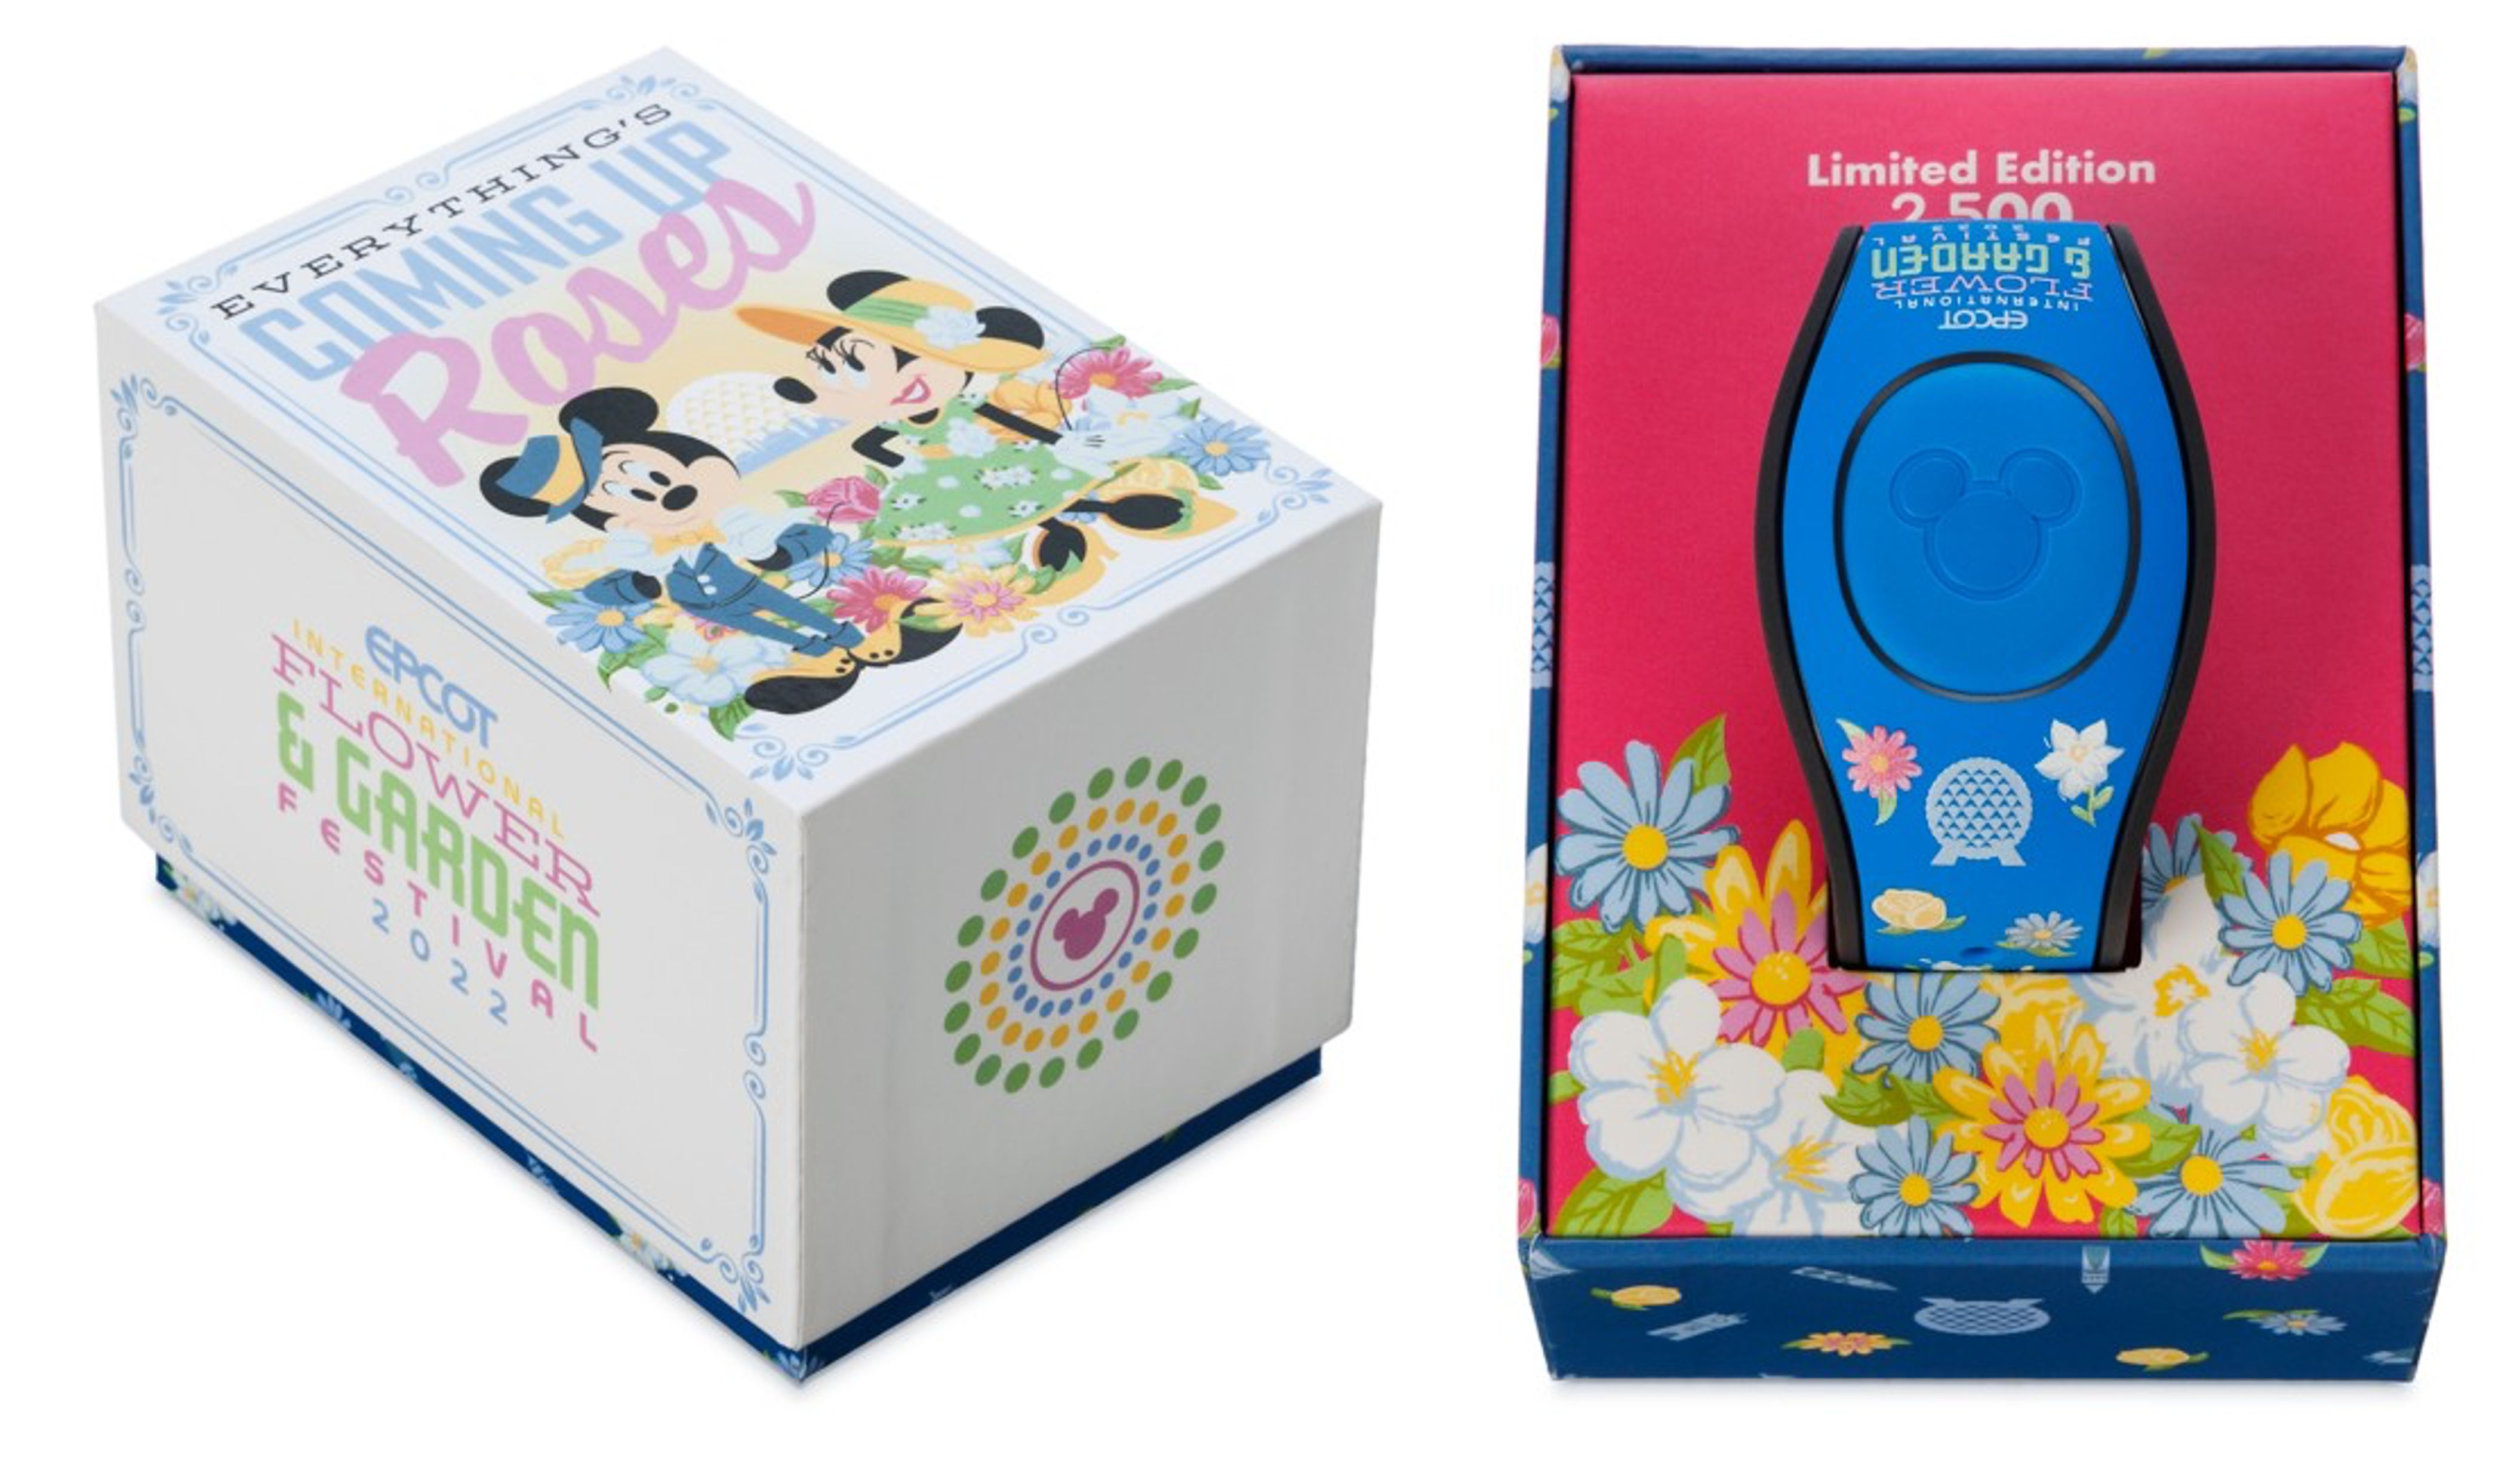 Check out this new Epcot International Flower & Garden Festival 2022 Limited Edition MagicBand is coming shortly